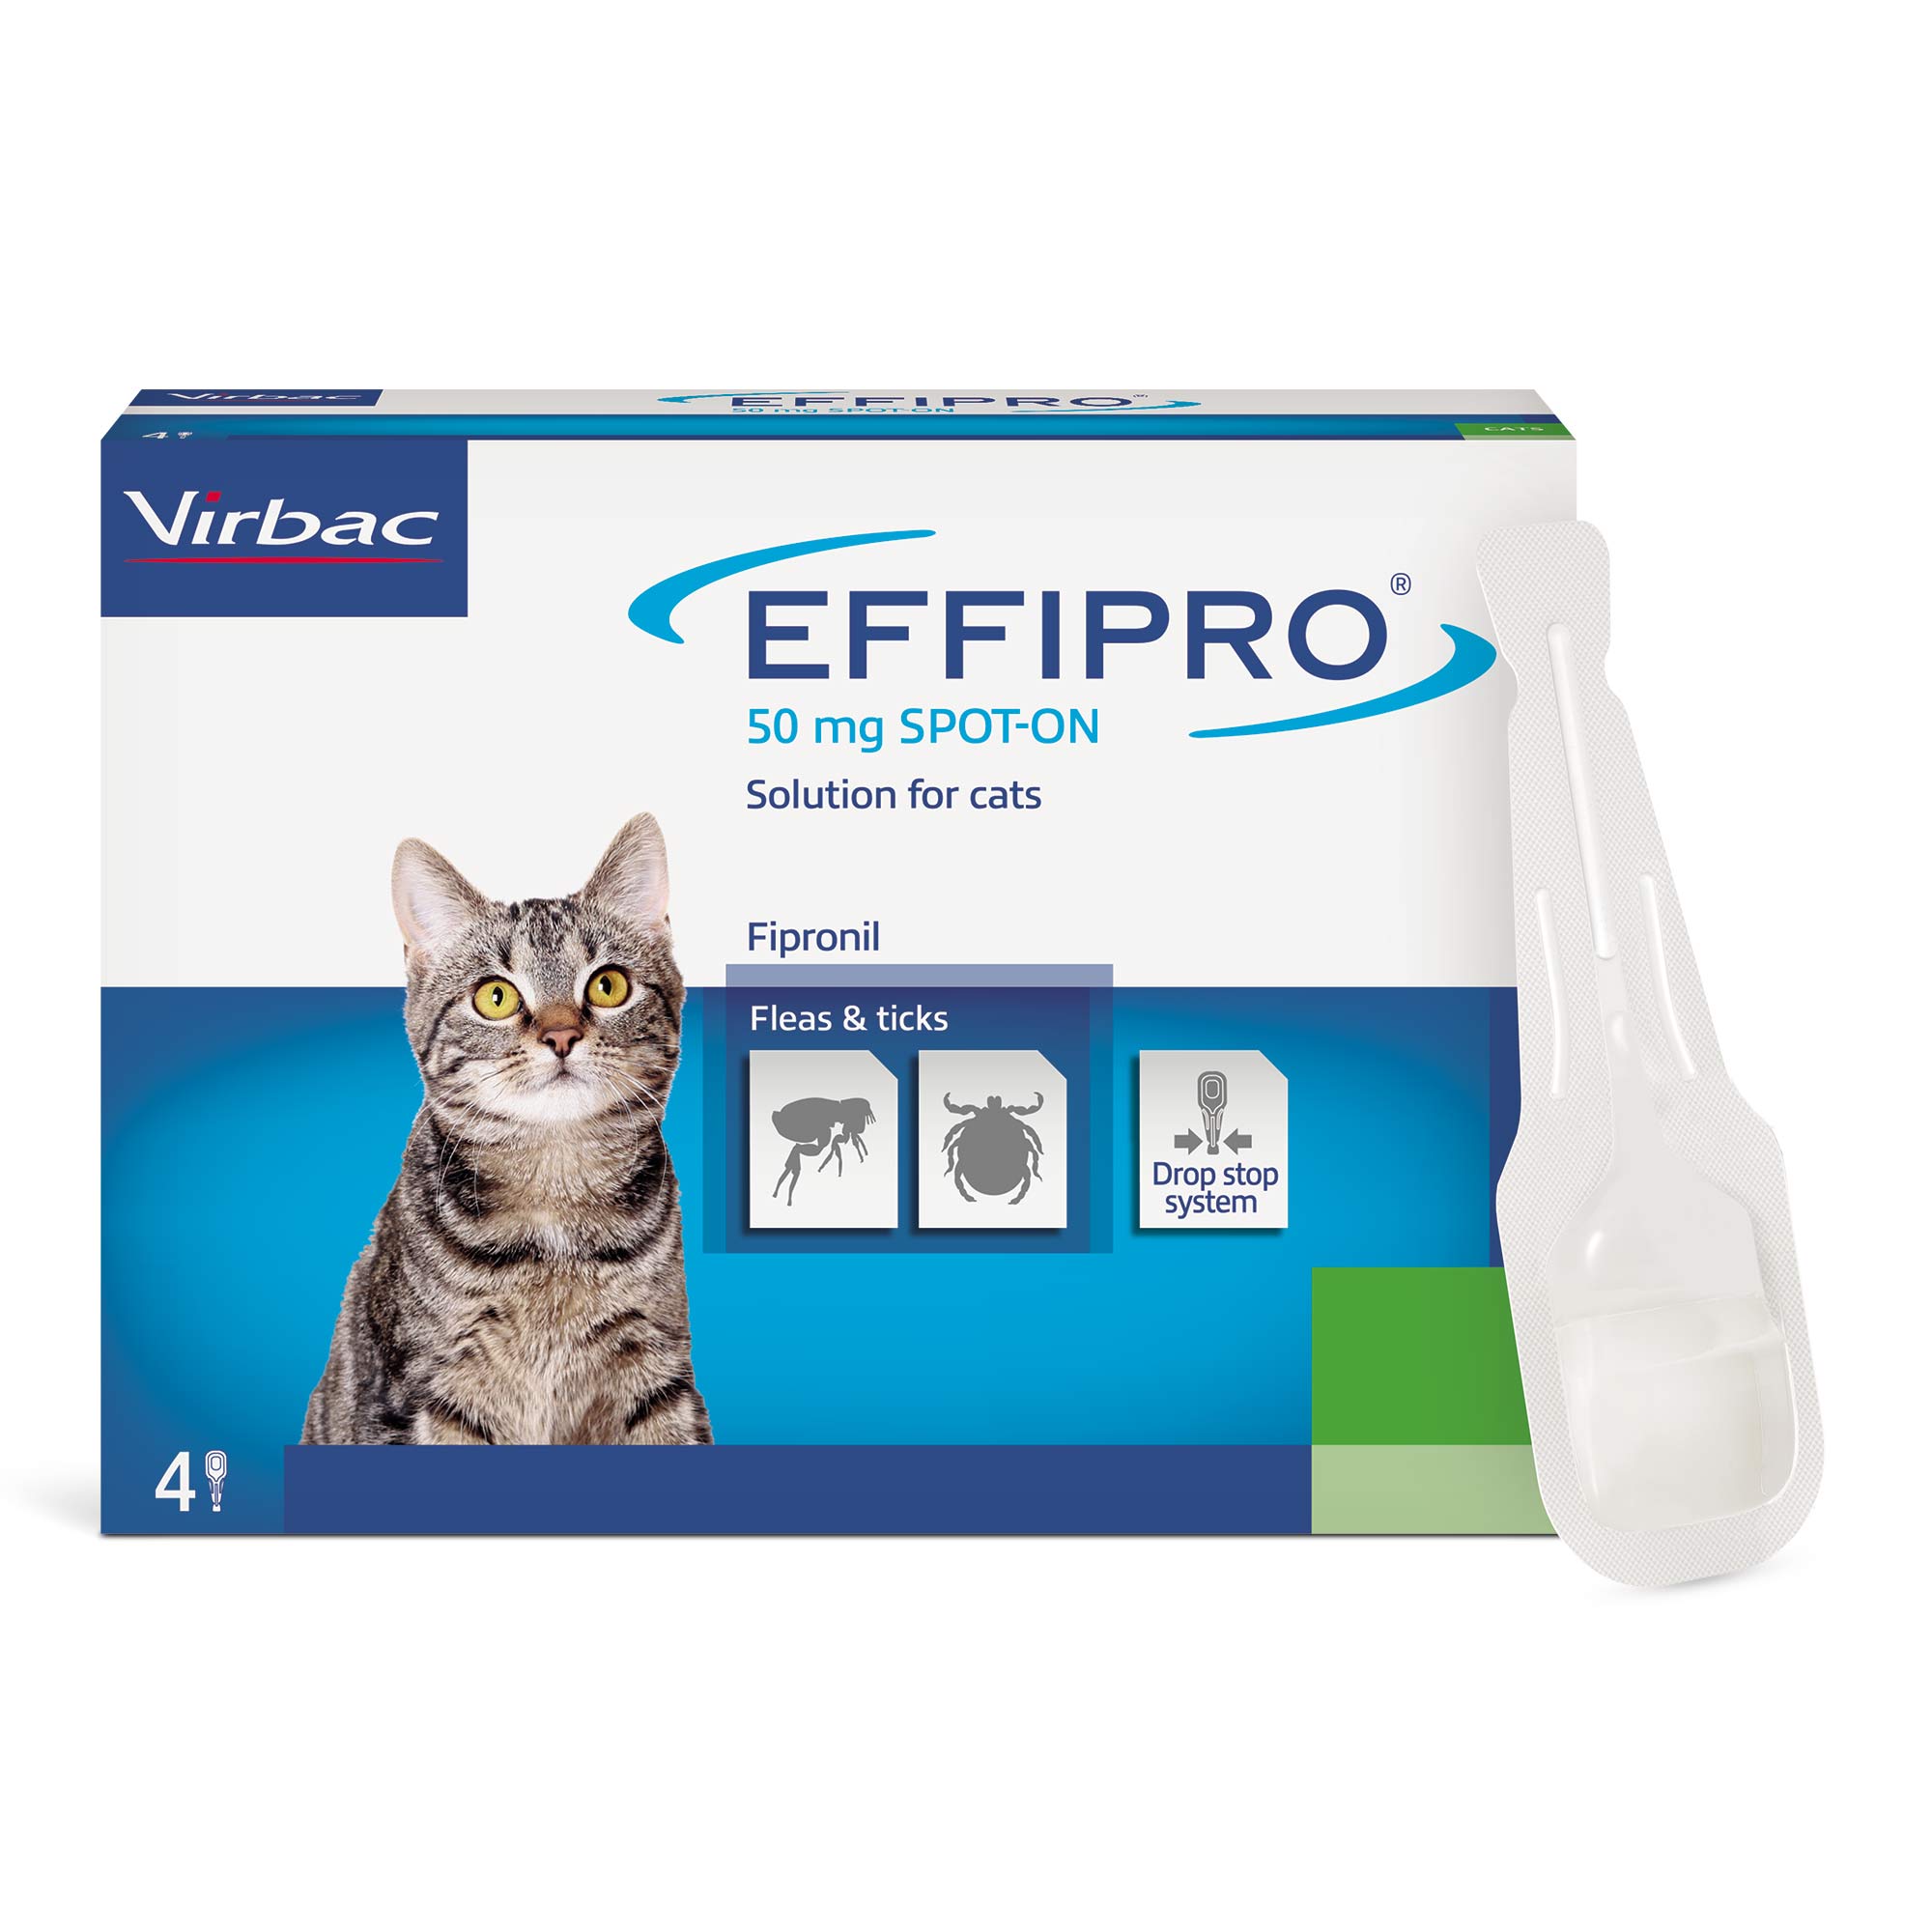 Virbac Effipro Spot On For Cats & Dogs 4 Pack